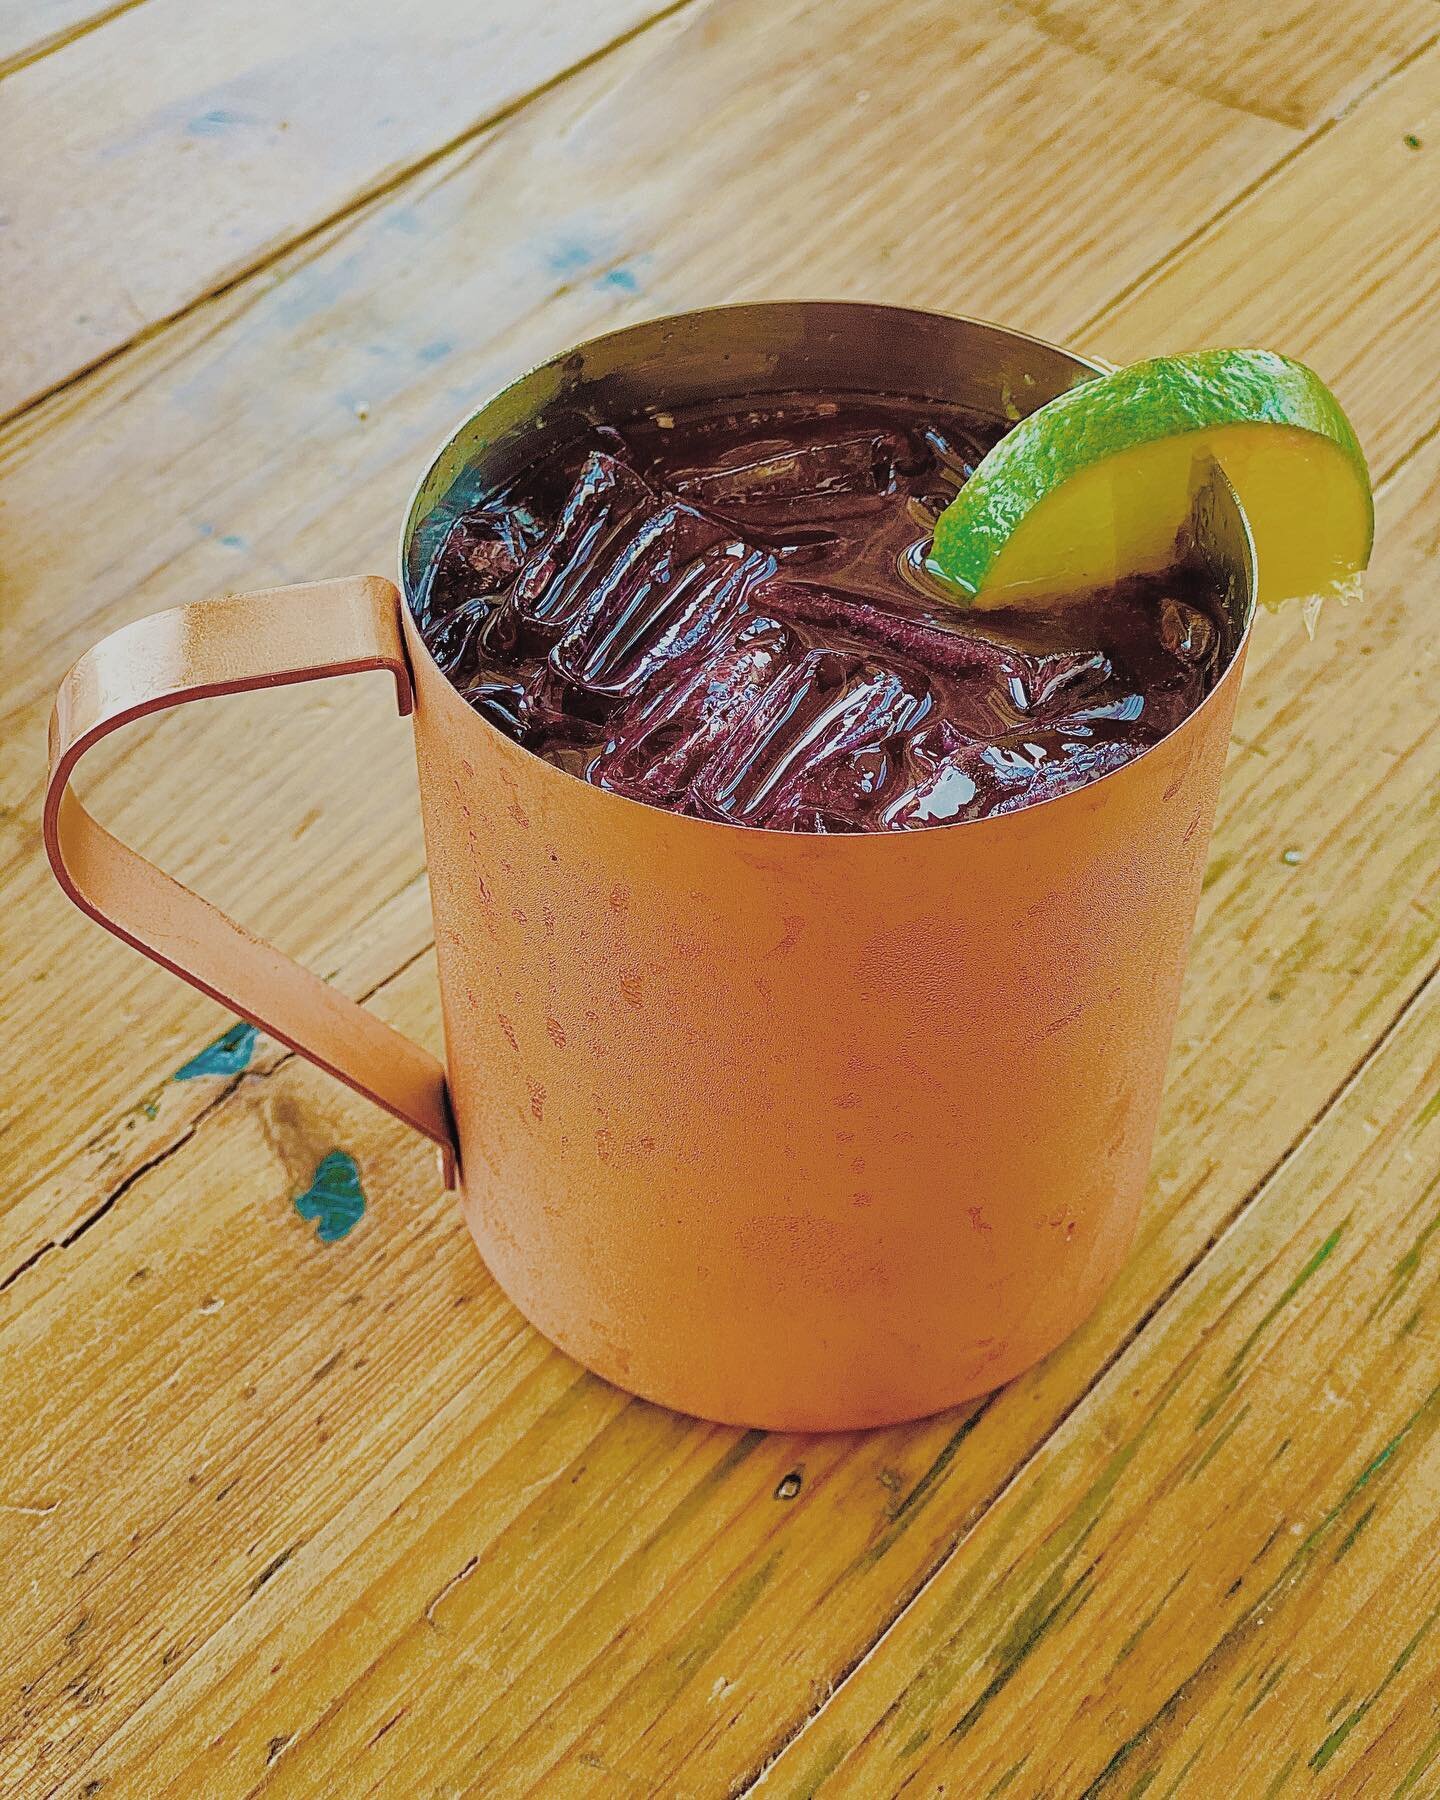 If you love a good Moscow Mule, our Huckleberry Mule is sure to blow you away. 😋

This #CocktailTuesday , come join us for our take on a classic! Available tonight from 4:30-9 p.m. during dinner service at our Wenatchee location. 🎉